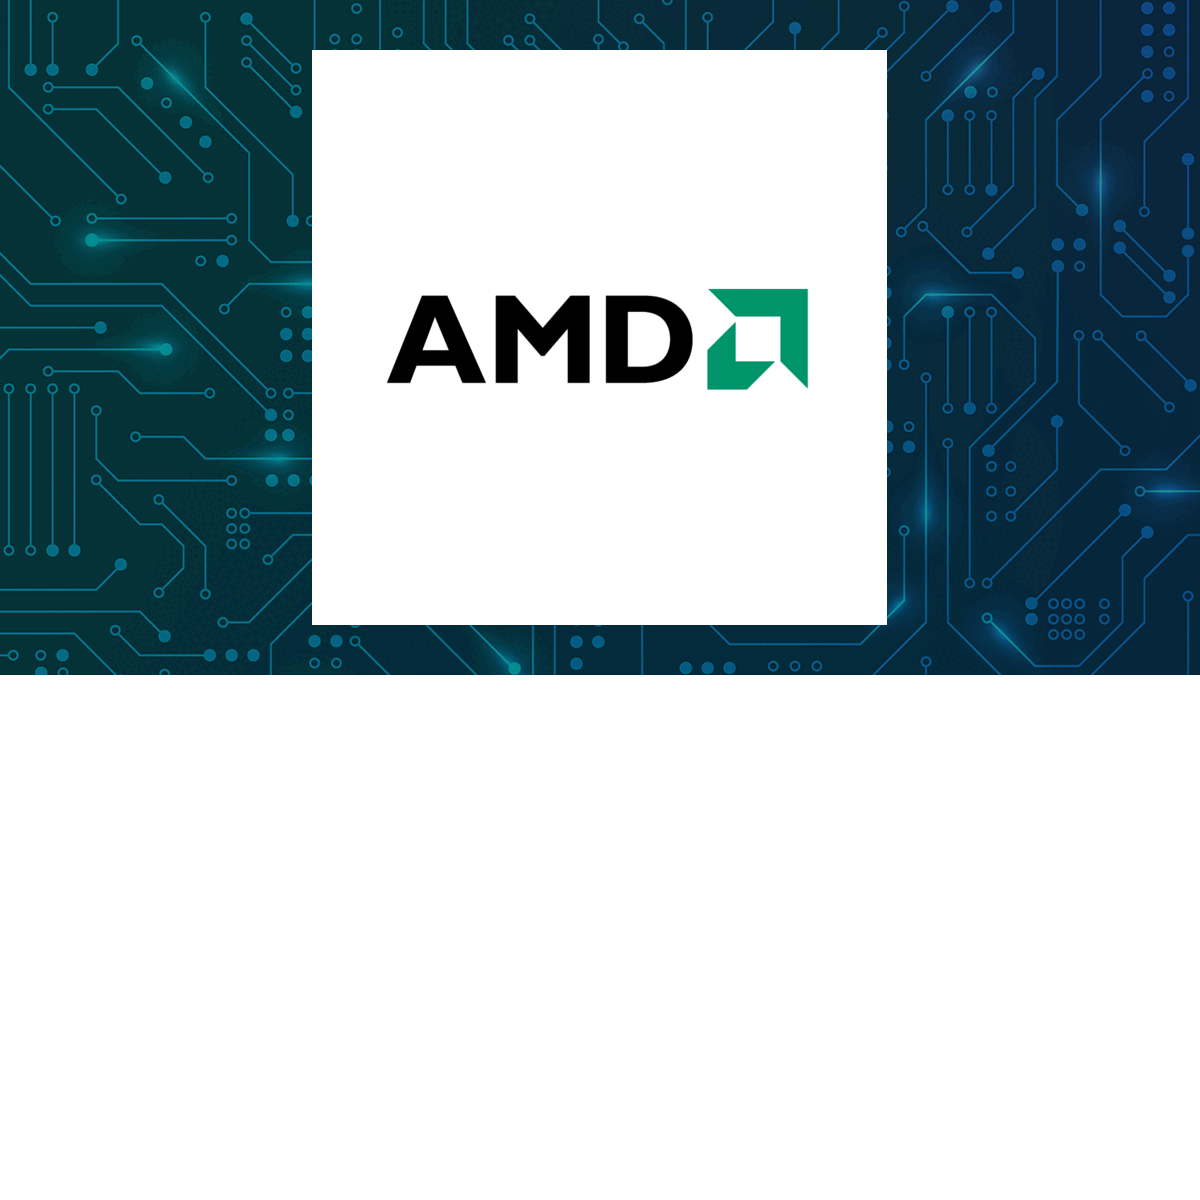 Advanced Micro Devices logo with Computer and Technology background